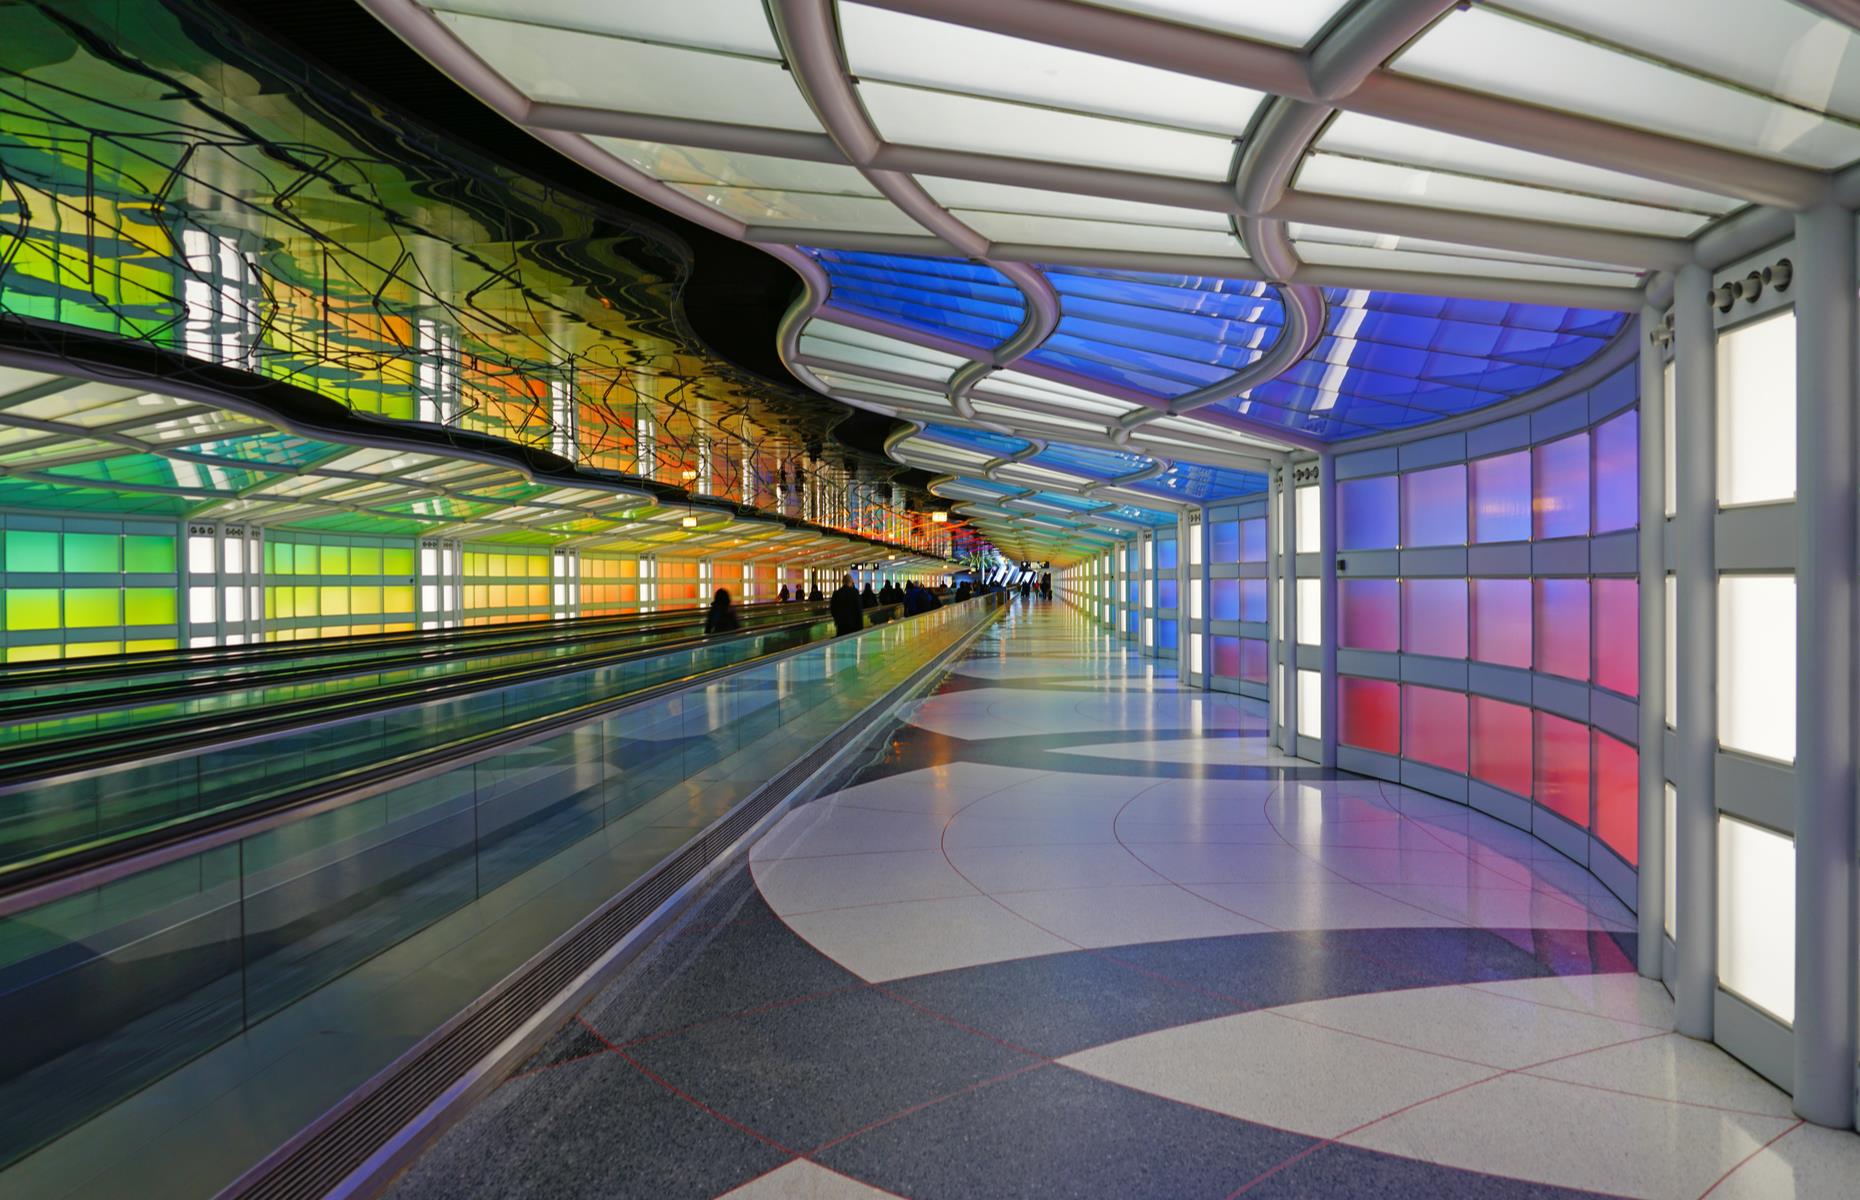 This unusual garden is not the airport’s only attraction. Psychedelic artworks adorn the walls and colorful, neon-lit passageways give travelers something to look at. There's also a tranquil yoga room so passengers can de-stress before their flight.